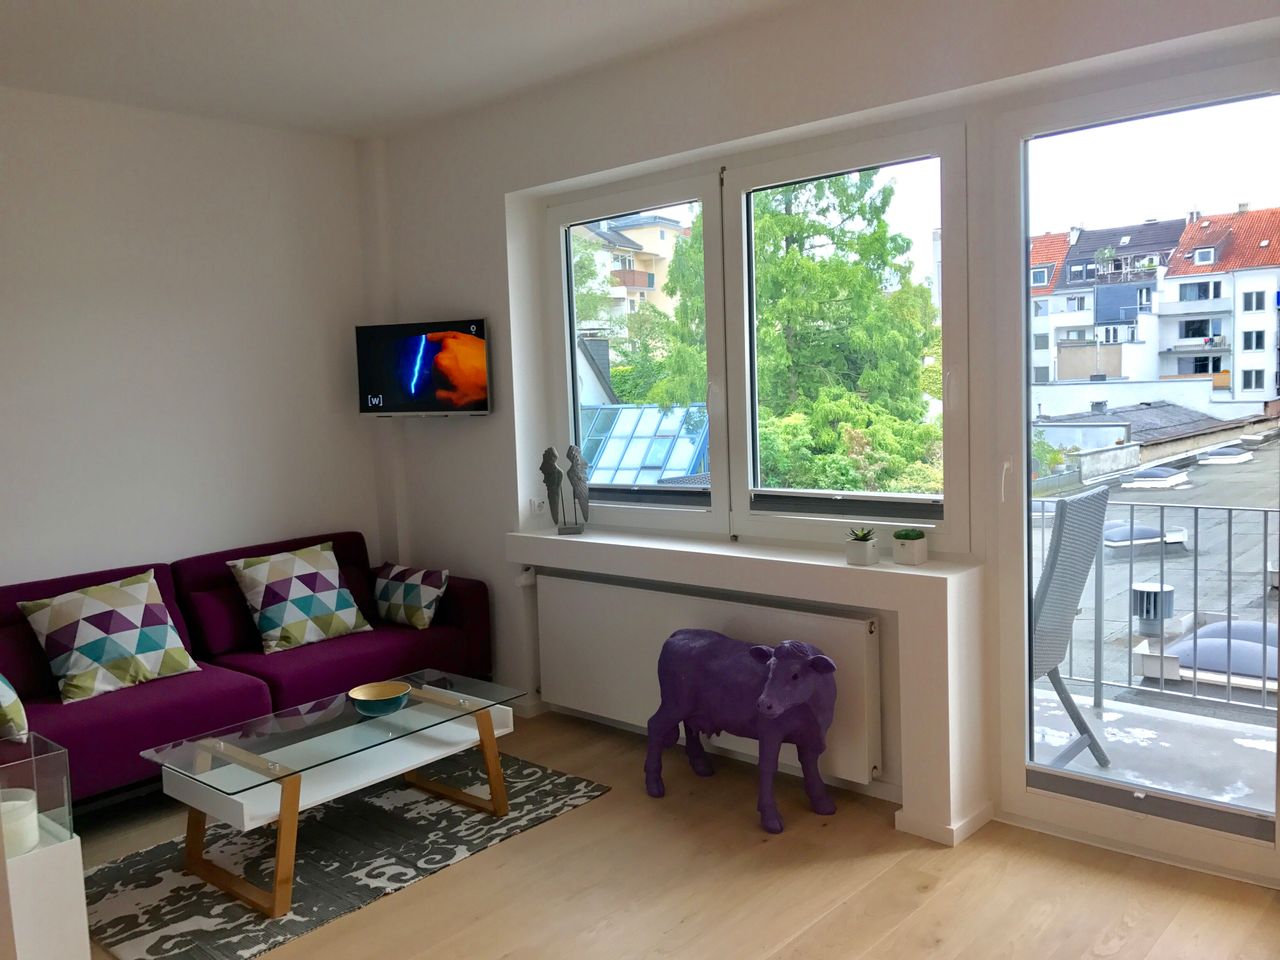 Redeveloped apartment in the centre of Düsseldorf